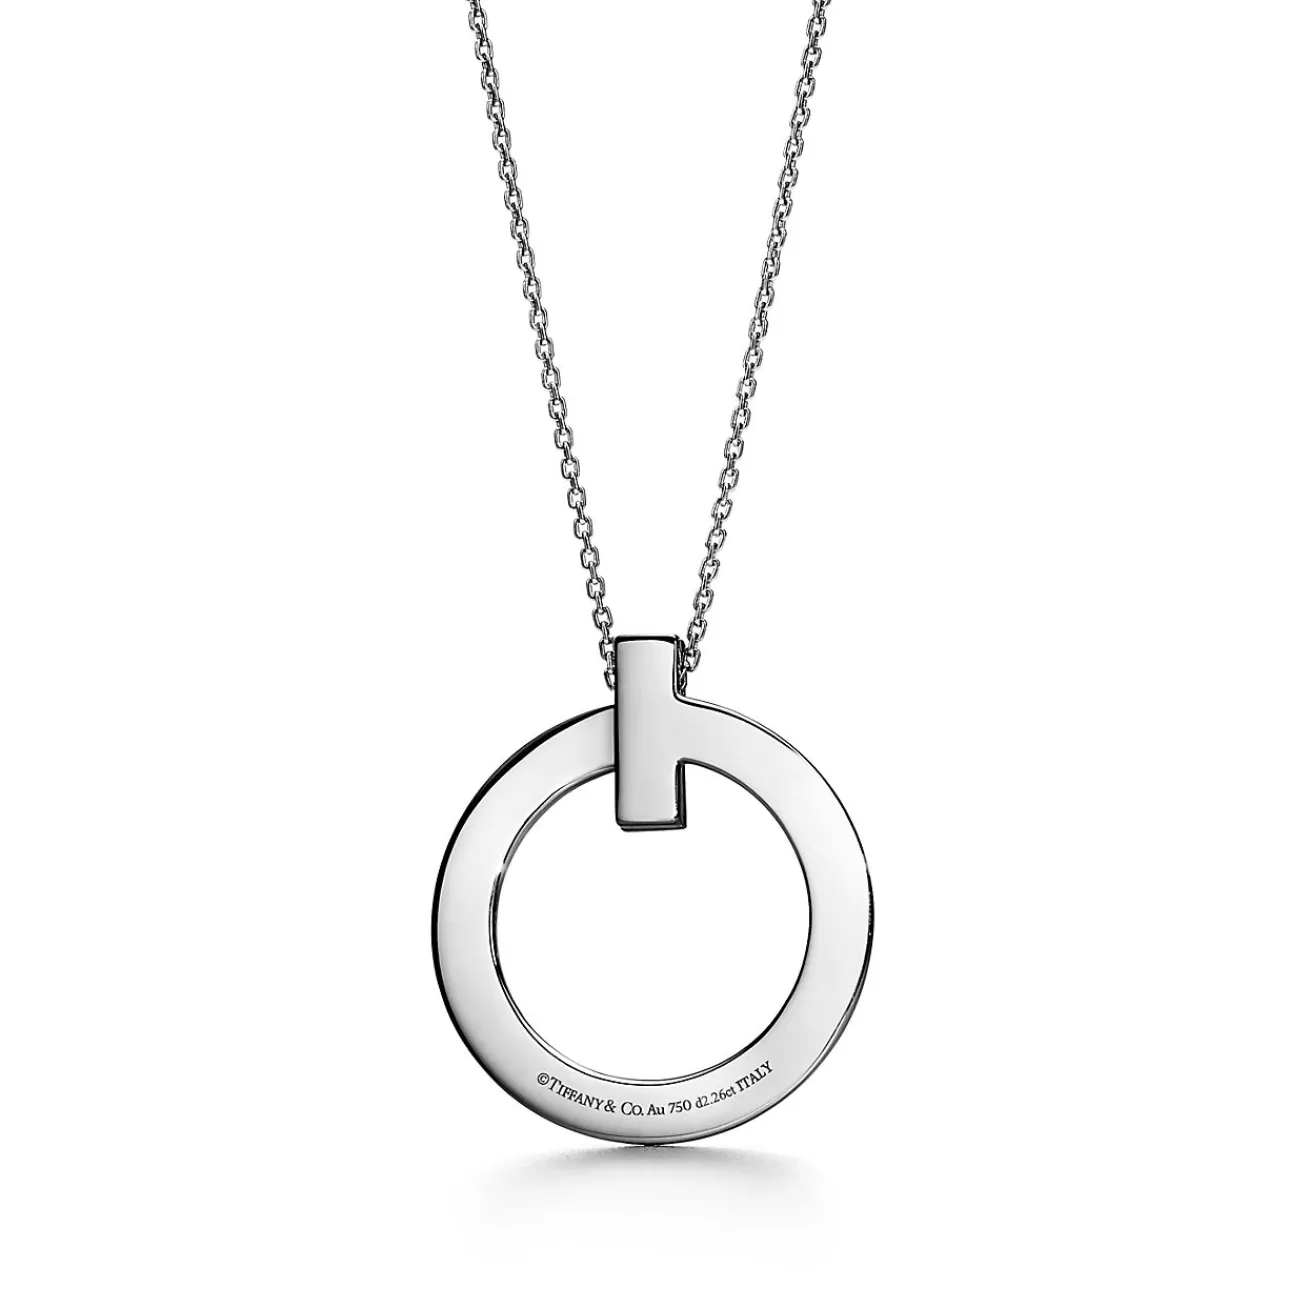 Tiffany & Co. Tiffany T T1 Circle Pendant in 18k White Gold with Diamonds, Large | ^ Necklaces & Pendants | Men's Jewelry